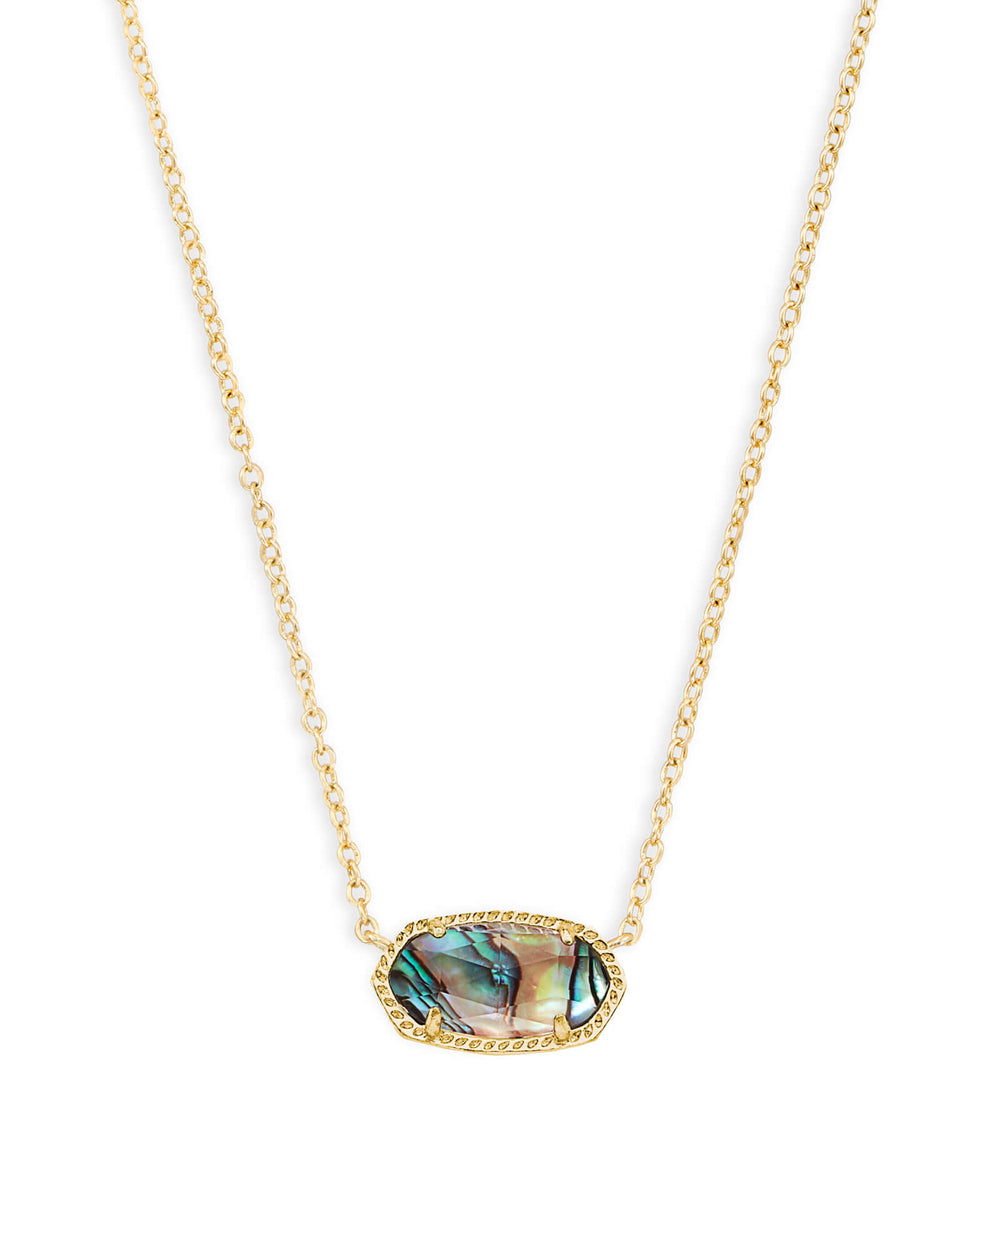 4217709207 - Elisa Necklace in Gold Abalone Shell